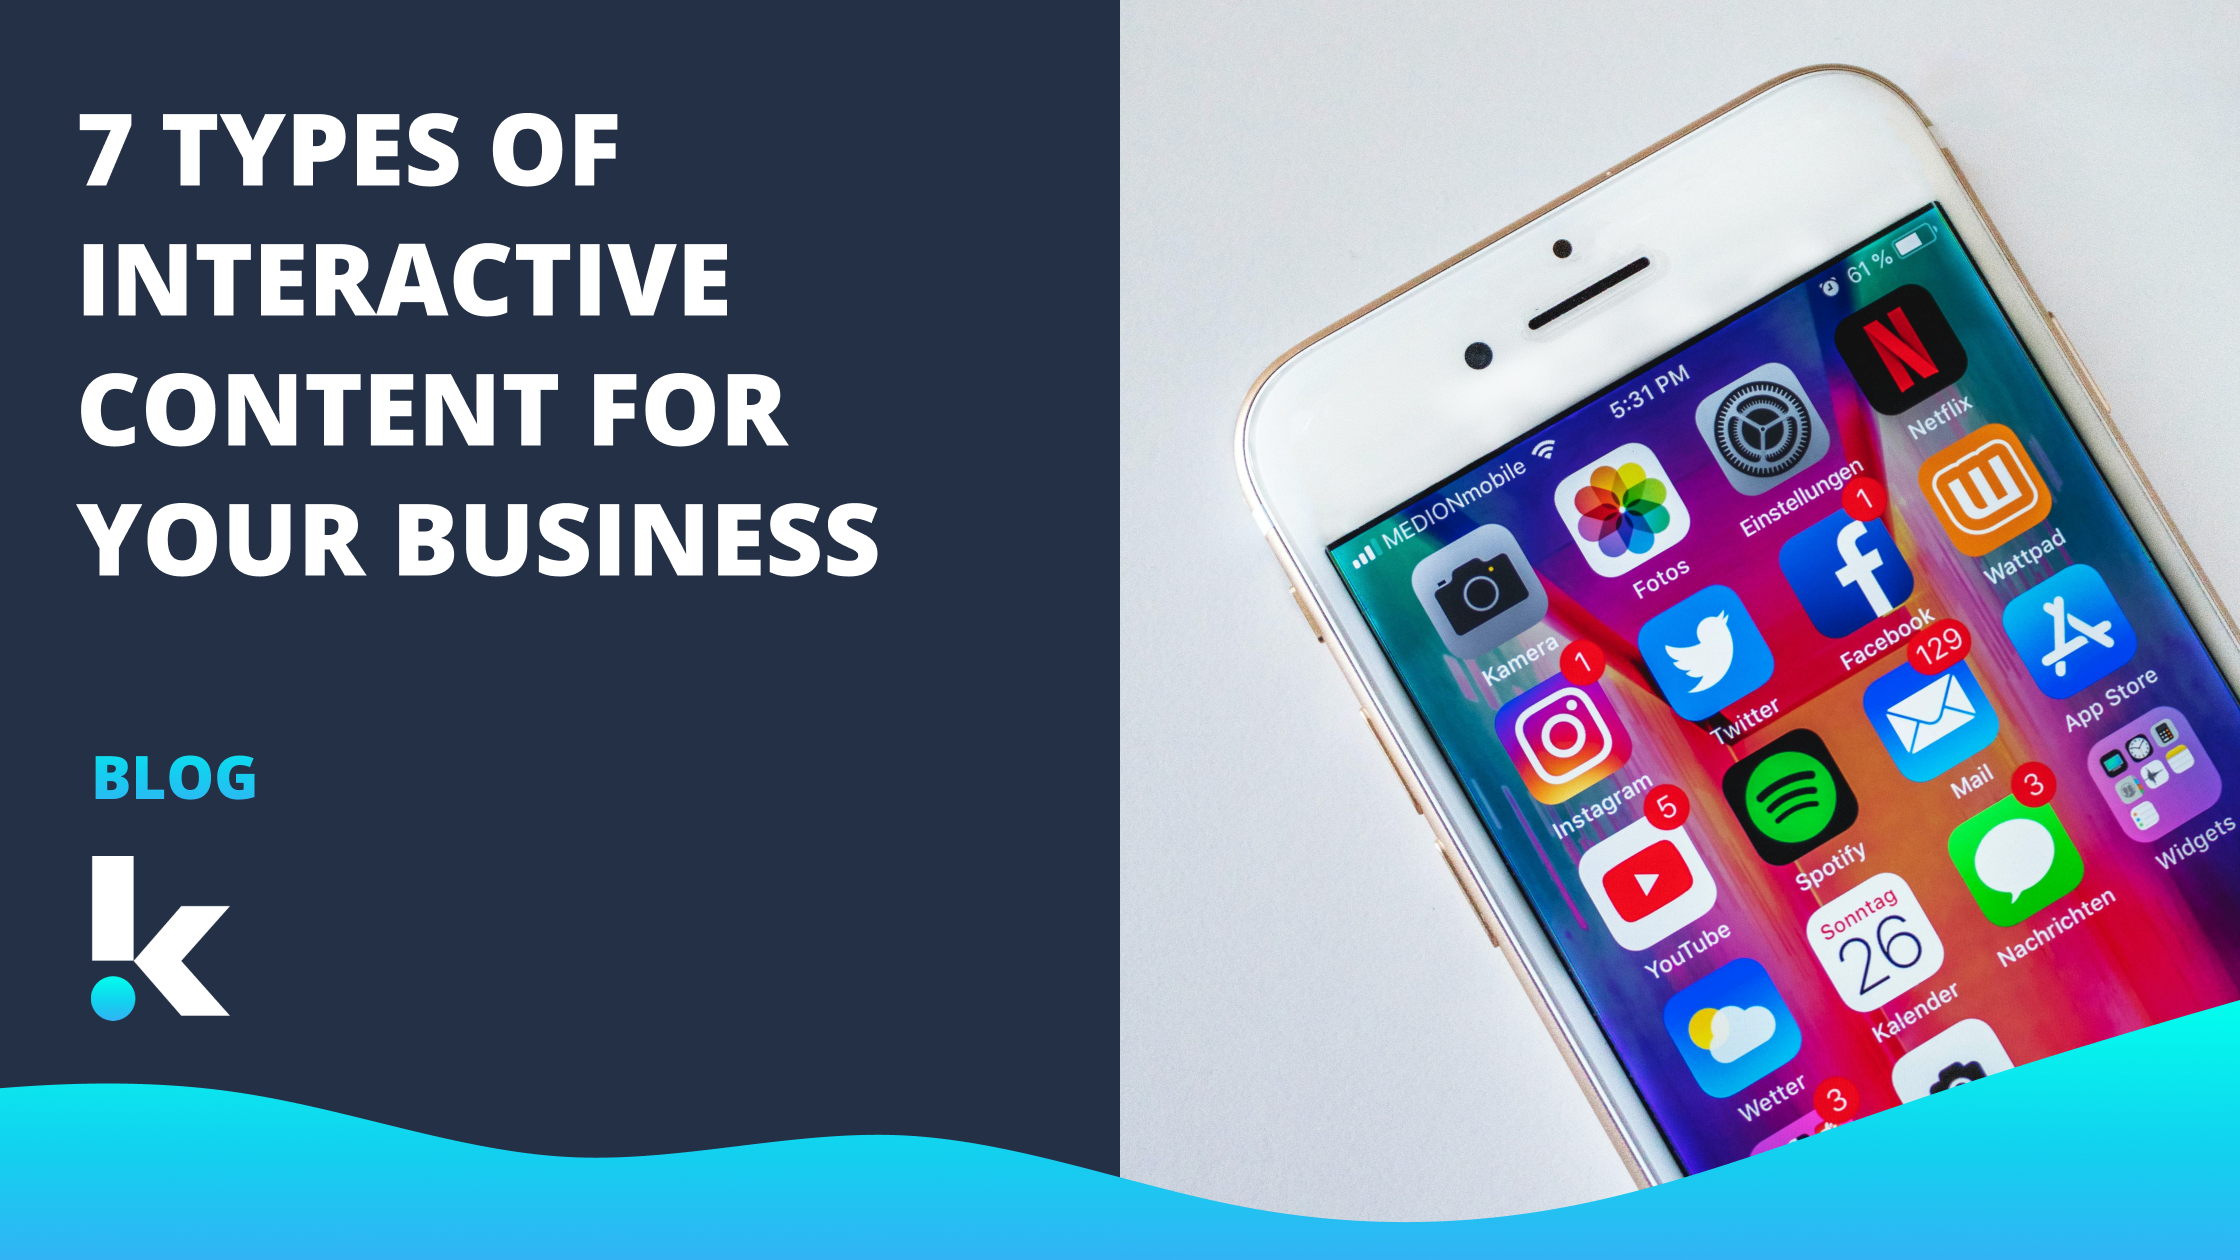 Get your target audience involved with your brand with 7 types of interactive content that will help your business stand out. Read more at Komo Digital.